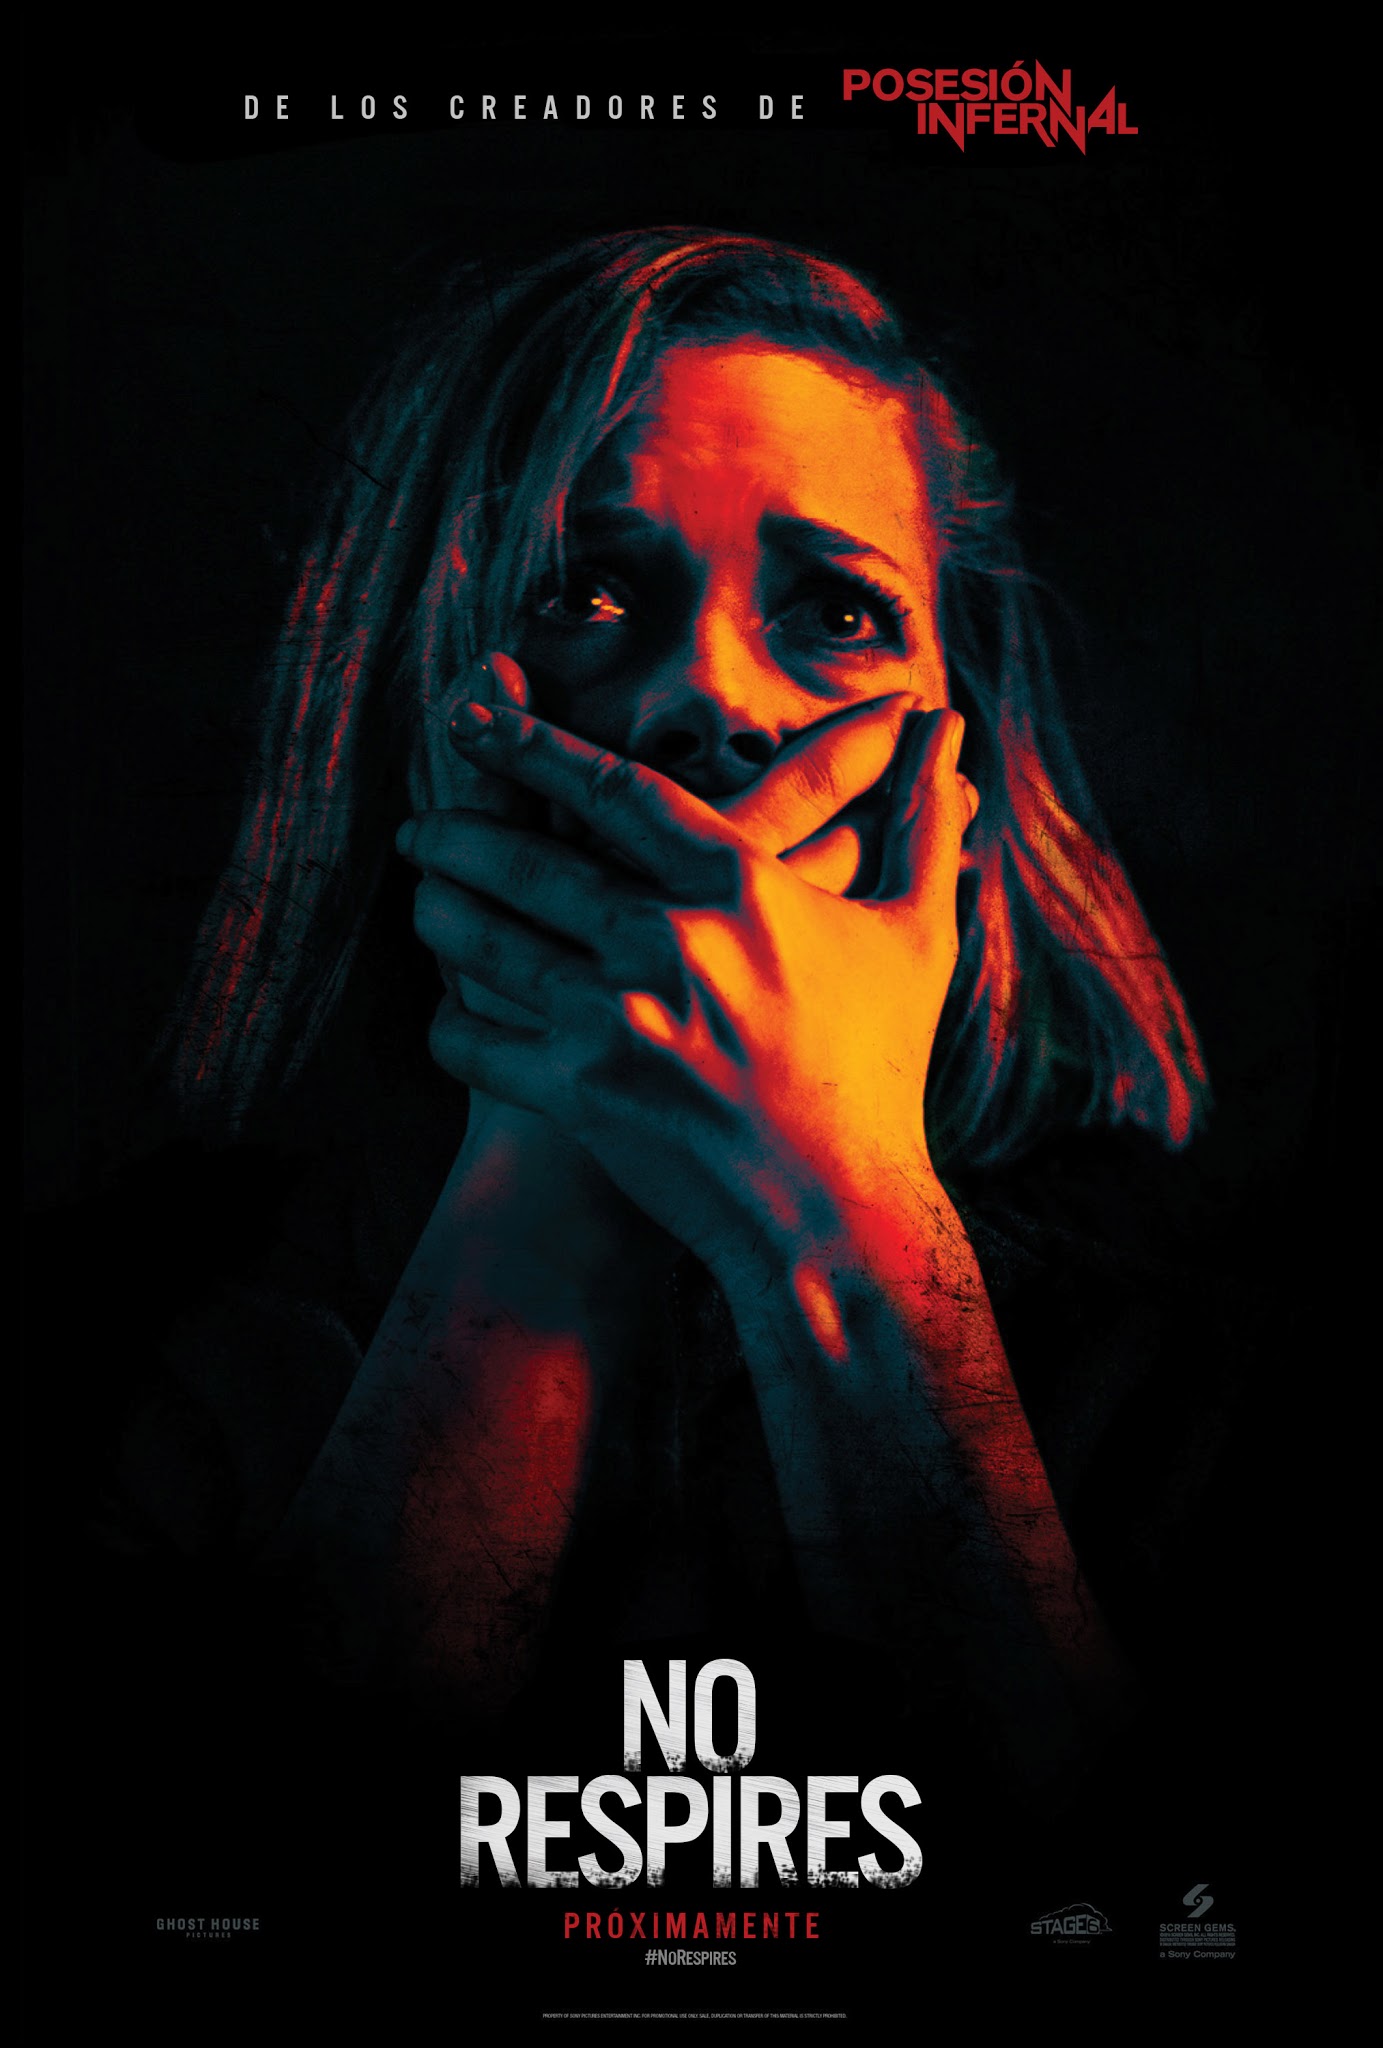 DON'T BREATHE official poster - opening in theaters nationwide August 26, 2016 from Screen Gems. (PRNewsFoto/Sony Pictures Entertainment)